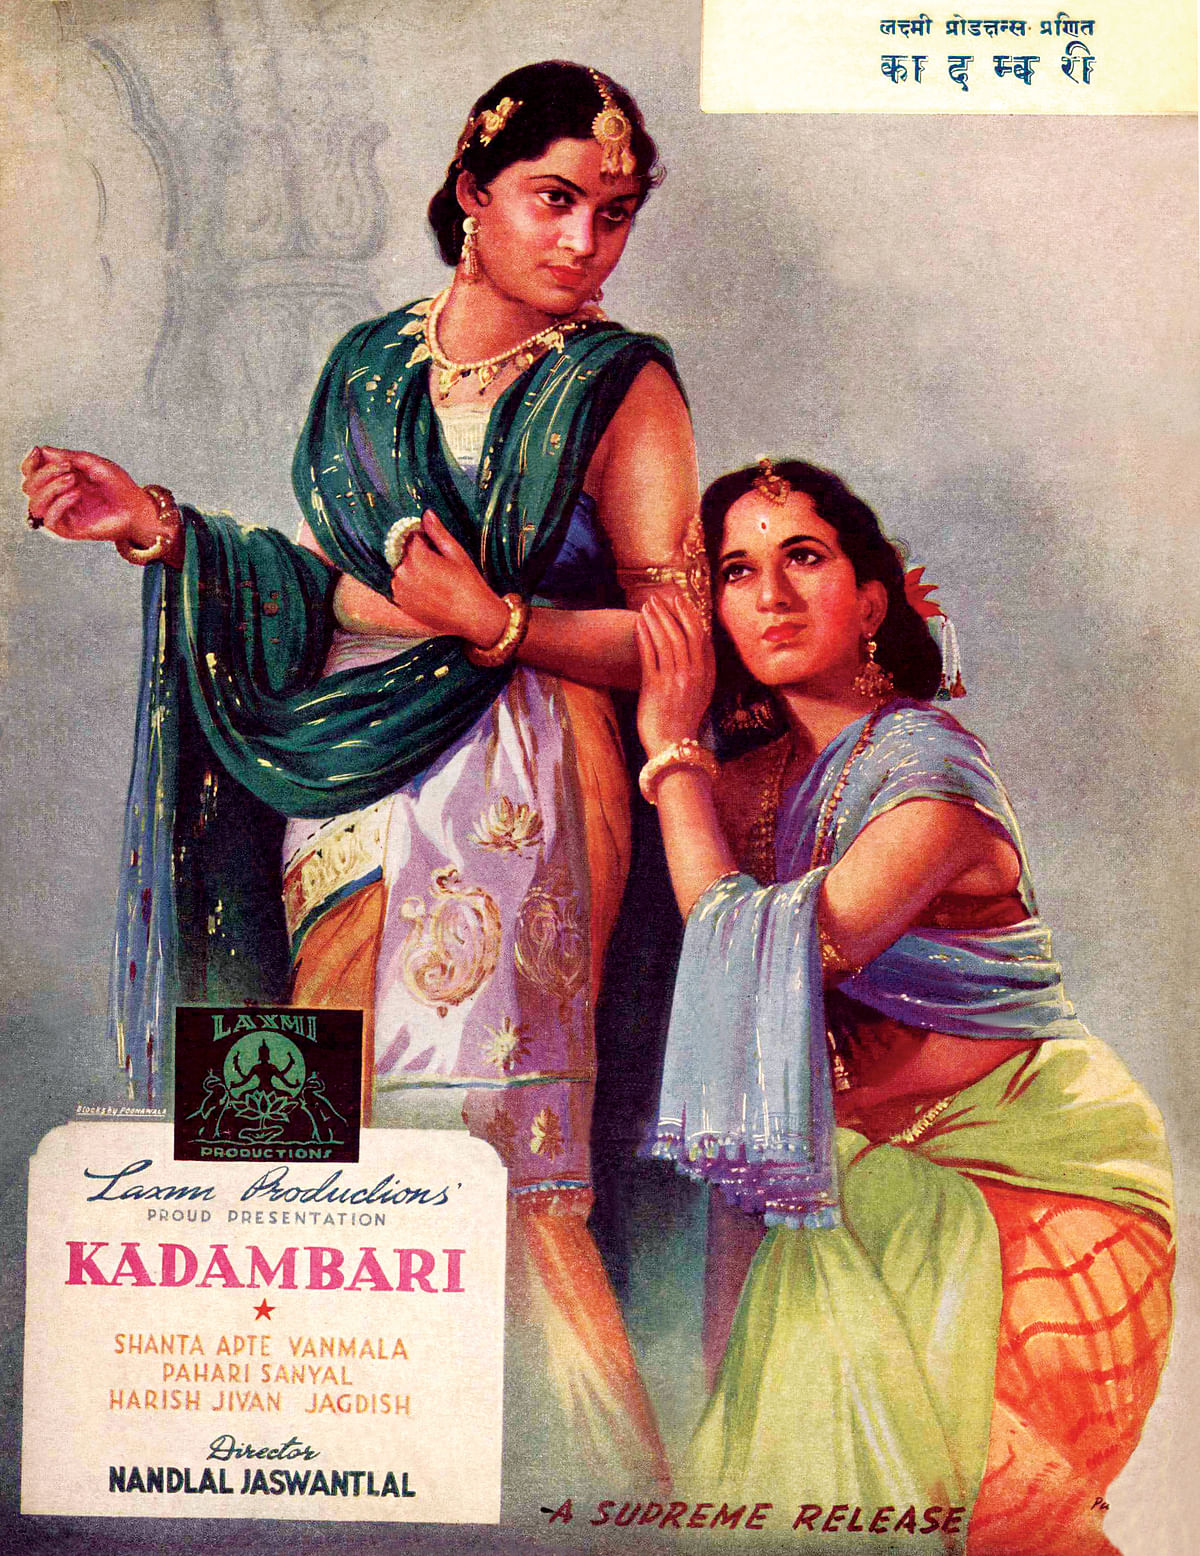 Women musicians of the 20th century tried the gramophone at a time when men of India showed resistance.